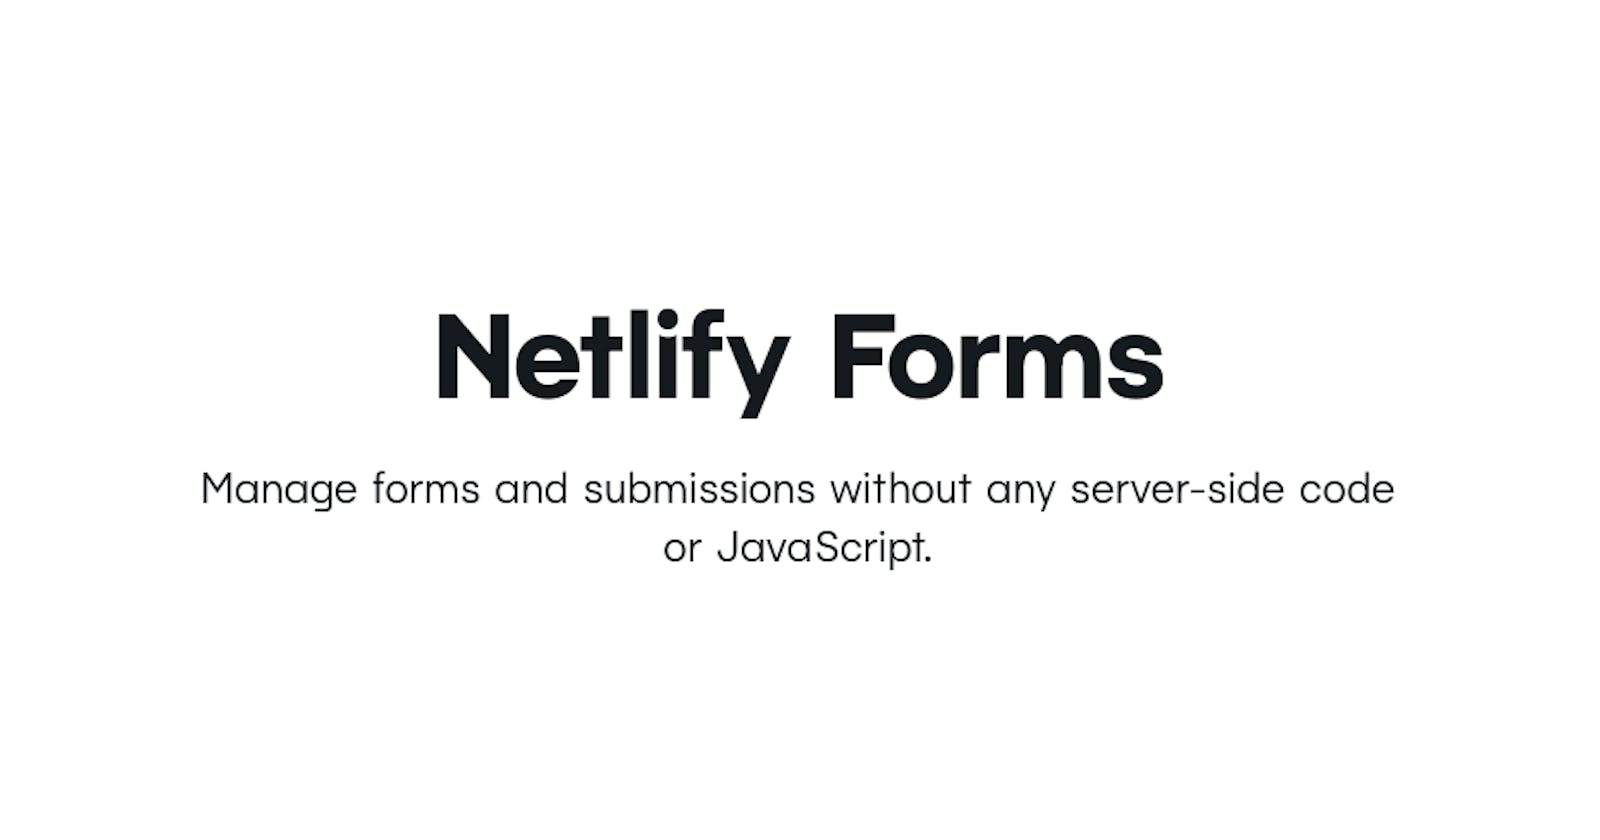 Getting started with Netlify forms